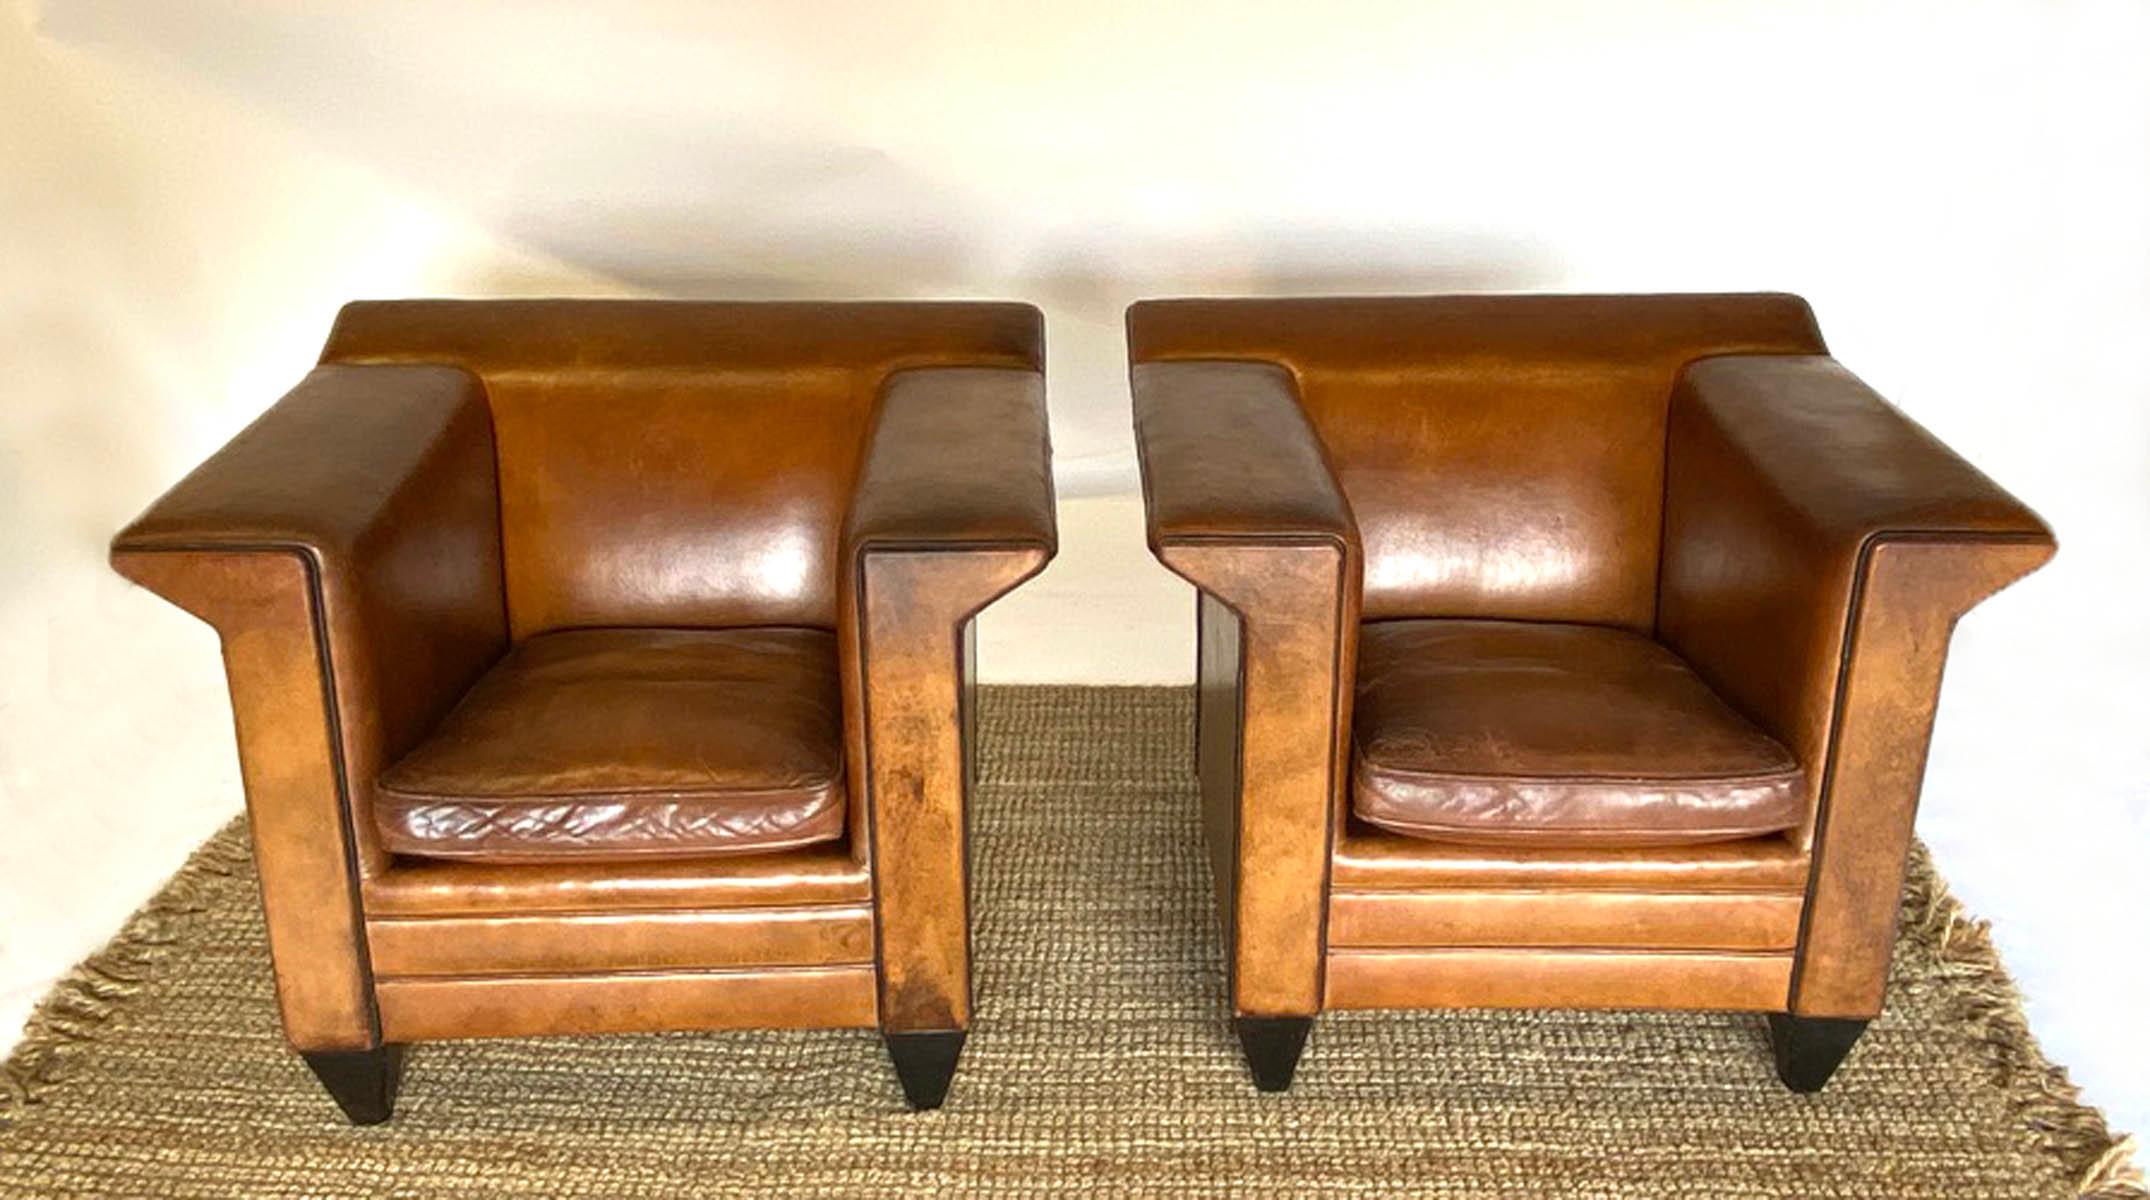 Exceptional tobacco leather armchairs by Bart Van Bekhoven. Angular, modern design, piped with black leather accentuates the angular shape. Four legs are also covered in black leather. These chairs have been refurbished, not losing their original